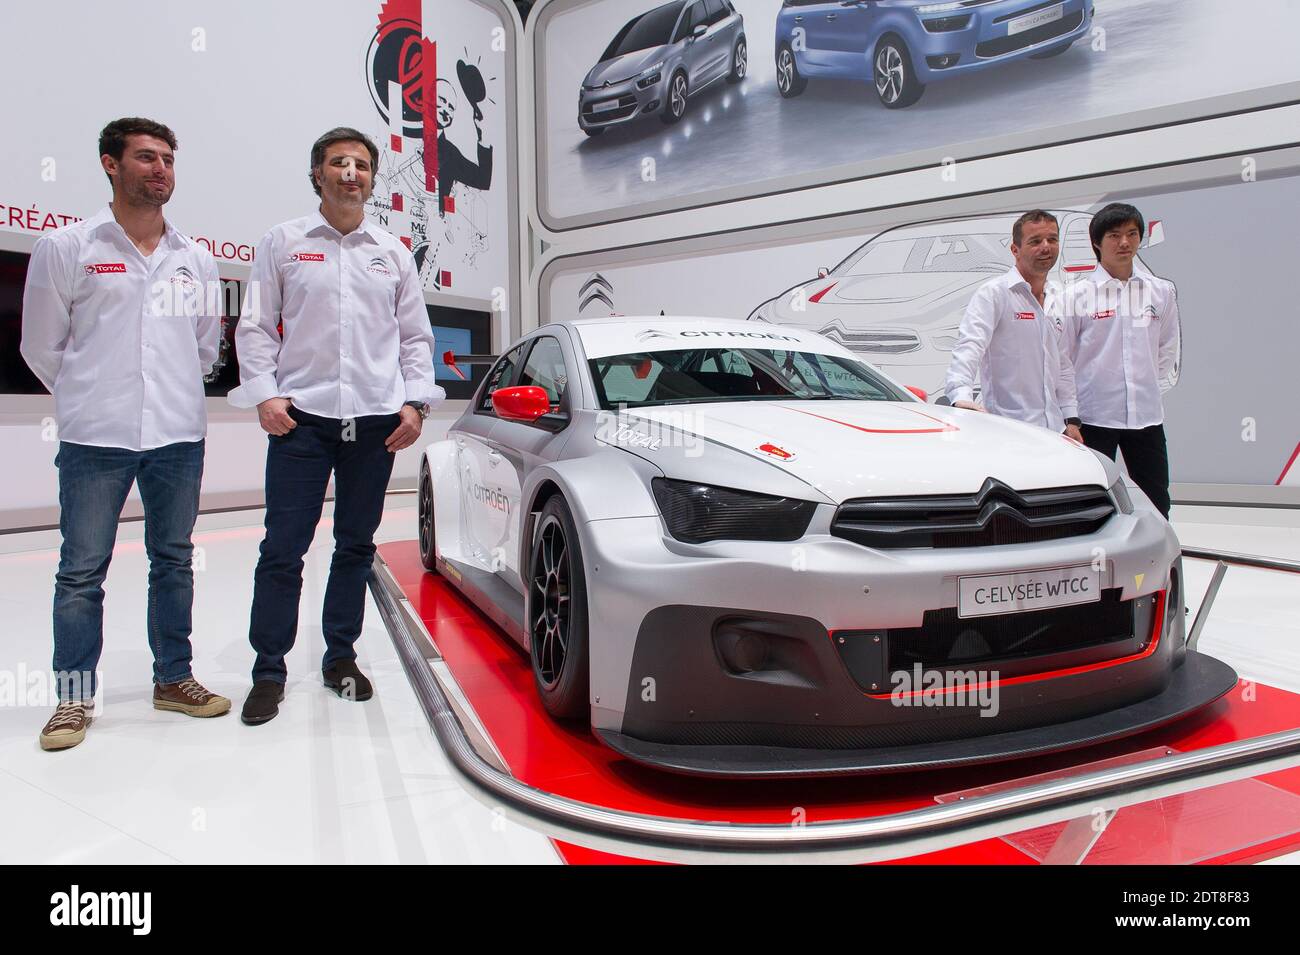 WTCC drivers (L-R) Jose Maria Lopes, Yvan Muller, Sebastien Loeb and Ma  Qinq Hua pictured during the 83rd International Geneva Motor Show, in  Geneva, Switzerland on March 4, 2014. Photo by Gilles